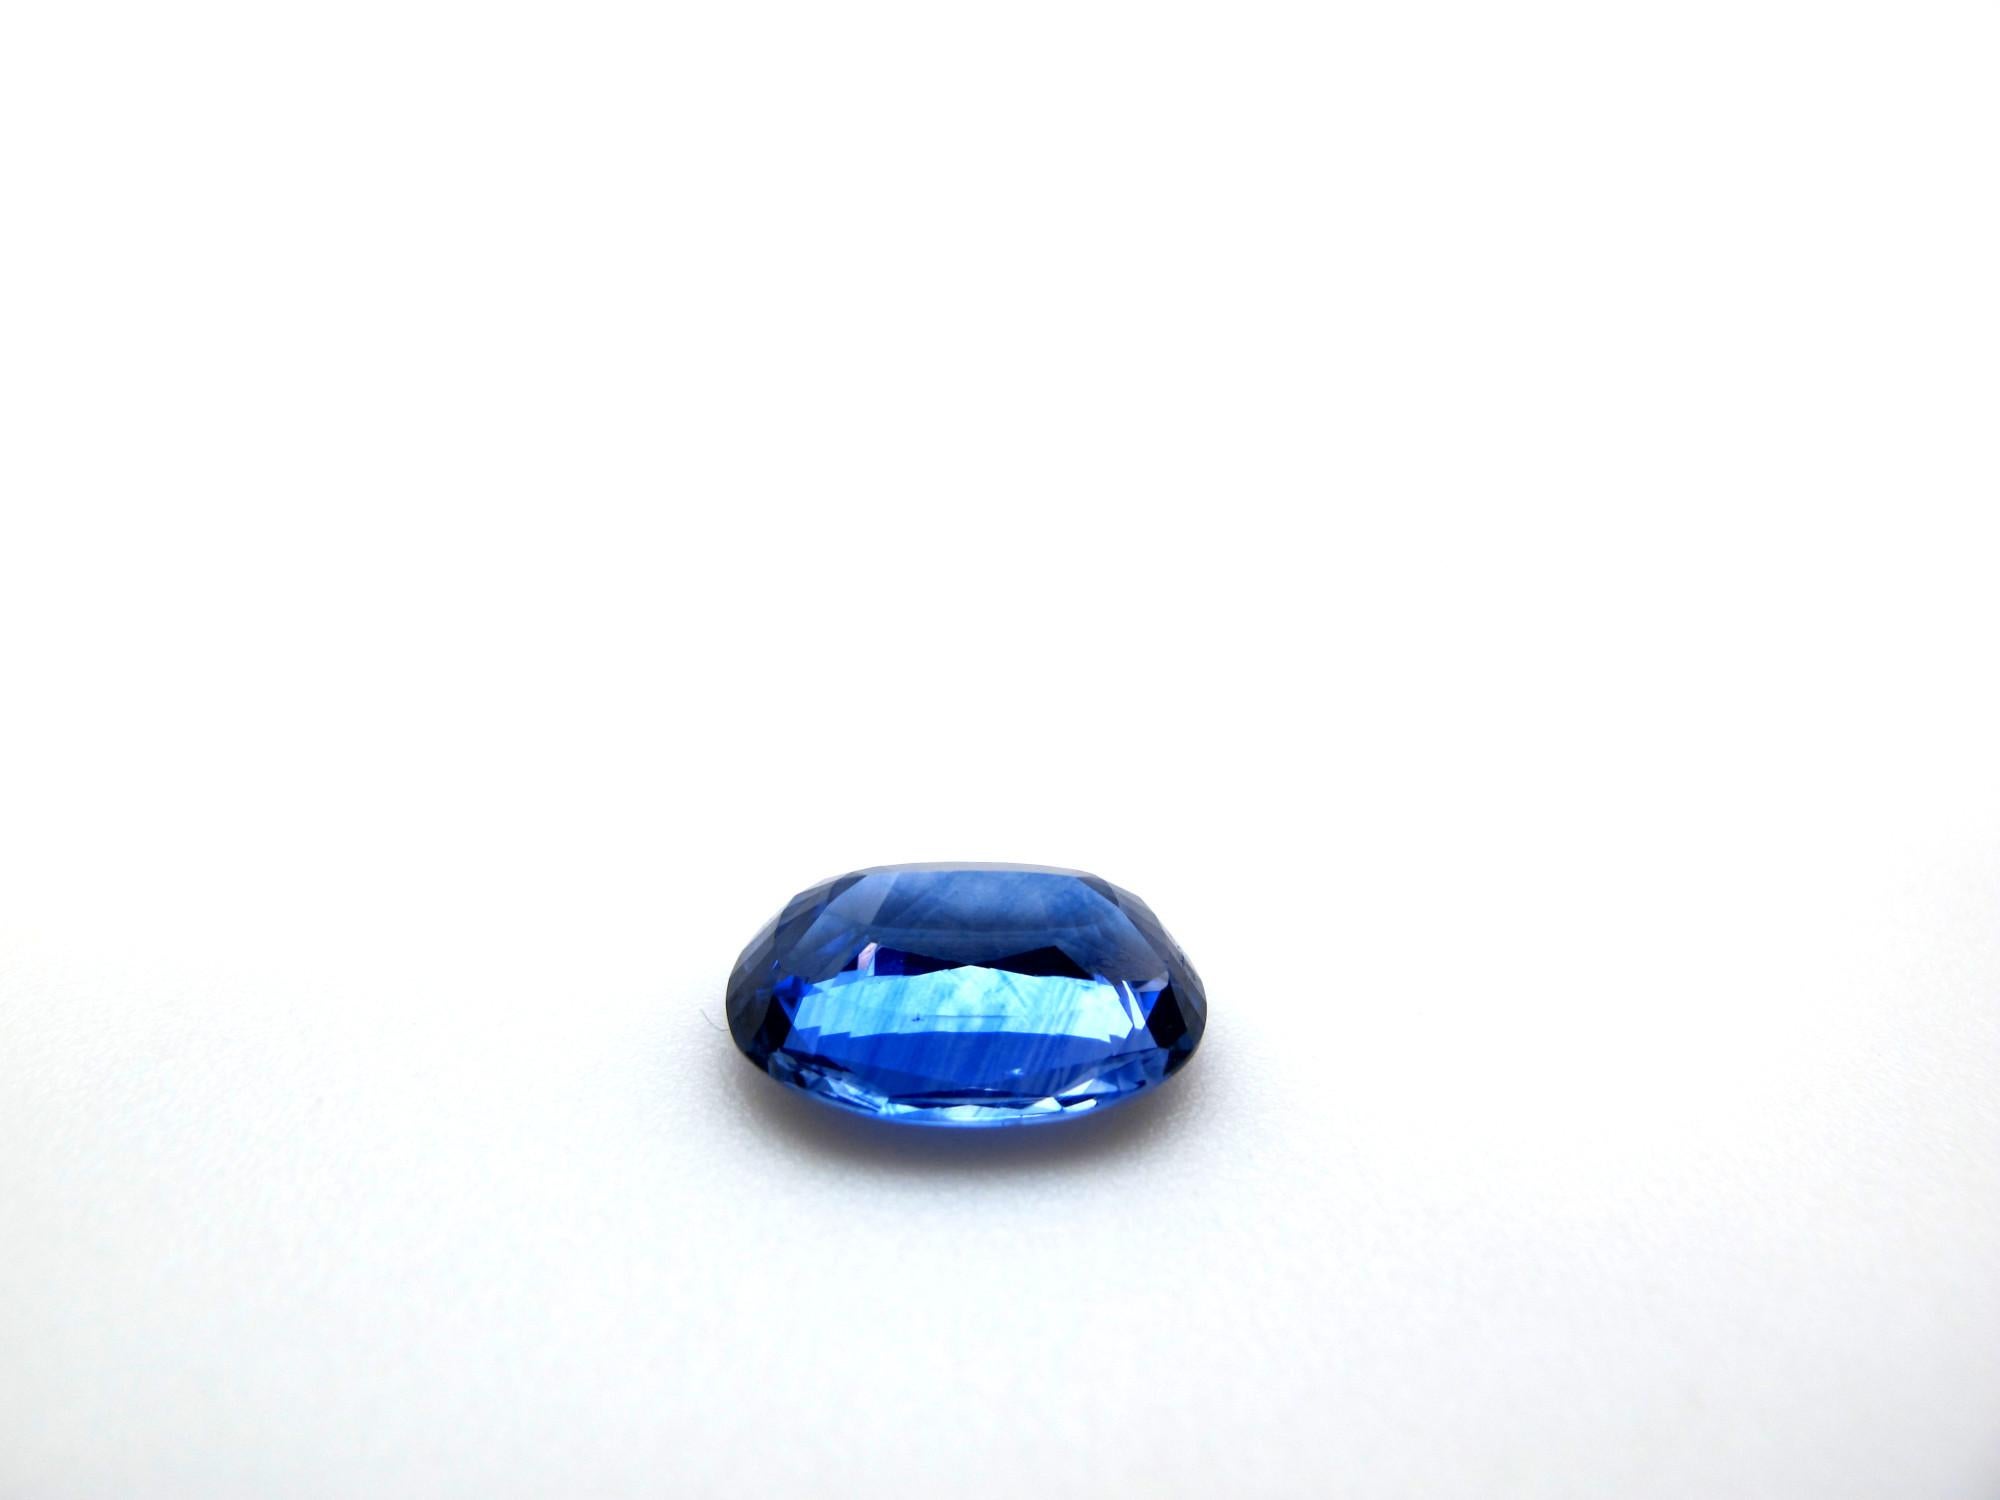 Oval Cut GIA Certified 3.59 Carat Oval Blue Sapphire Loose Stone